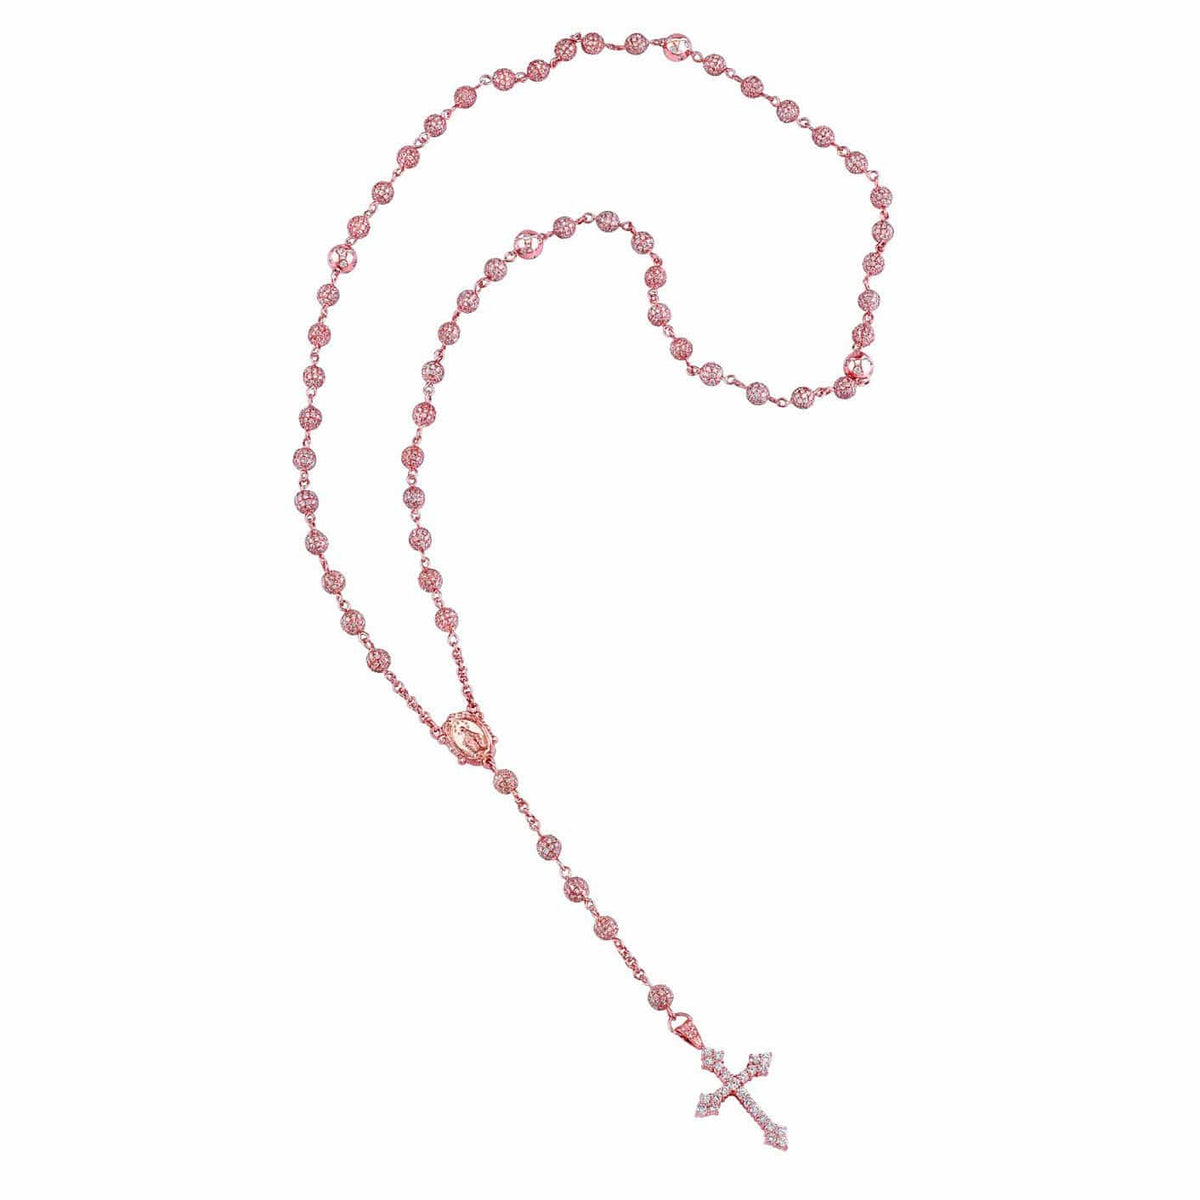 DIAMOND ROSARY NECKLACE - Chris Aire Fine Jewelry & Timepieces